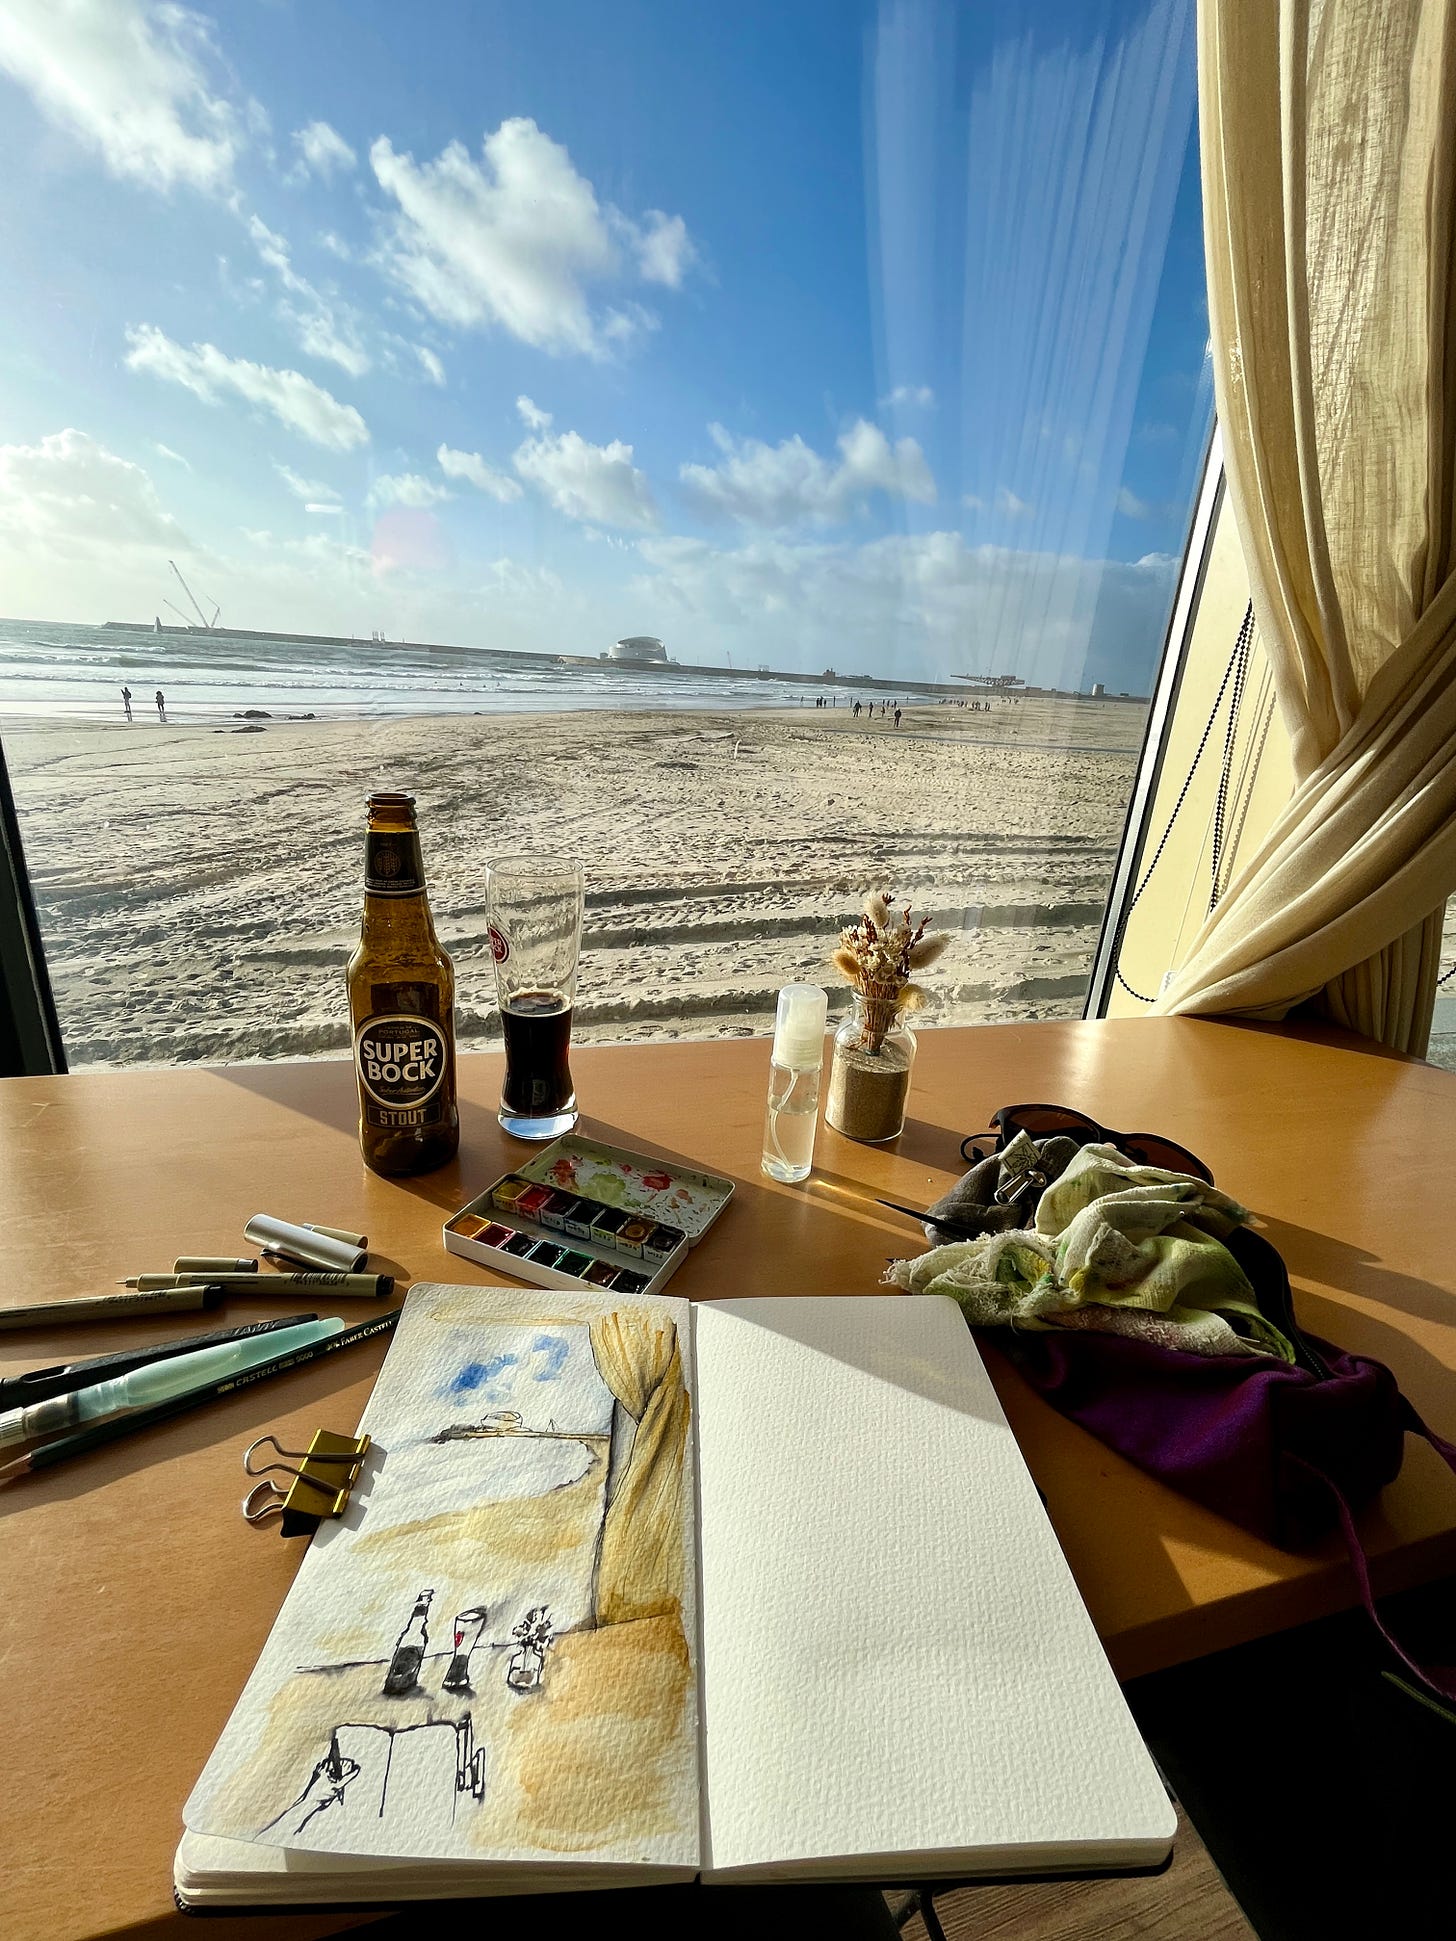 image: loose ink and watercolour sketch on location set up, with a drink, a couple of pens, watercolour kit, overlooking ocean view of blue sky, fluffy white clouds, miles of sand in Matosinhos Beach, Porto. The Port of Leixous in the far horizon can be seen